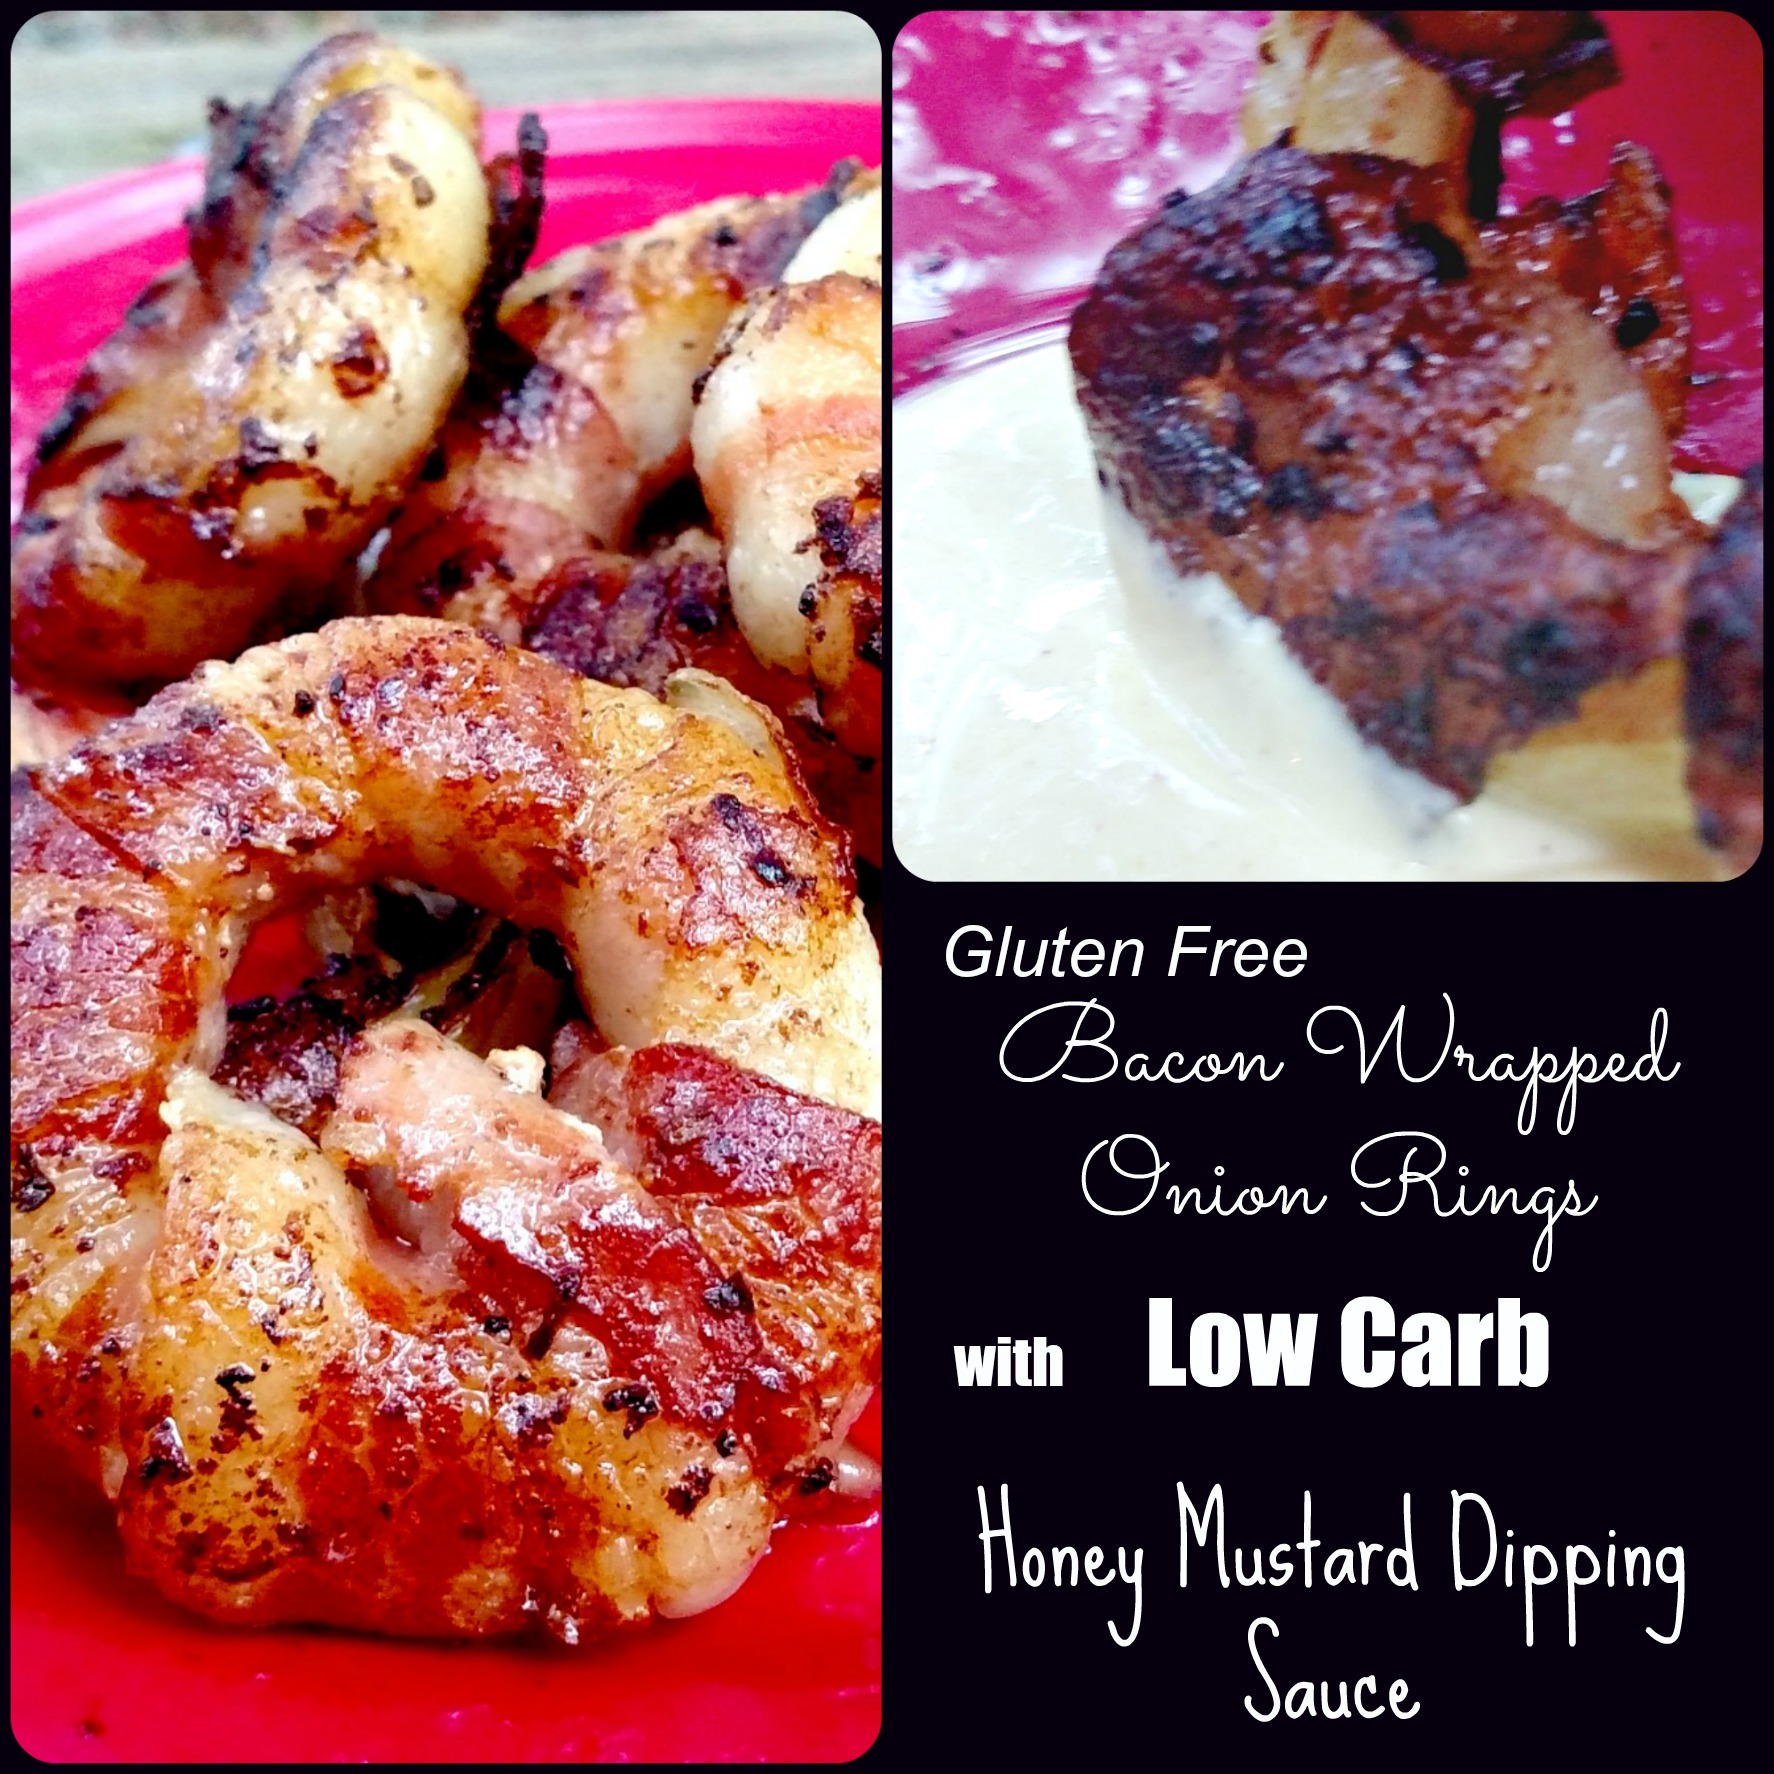 GF Bacon Onion Rings Recipe with Low Carb Honey Mustard Dipping Sauce